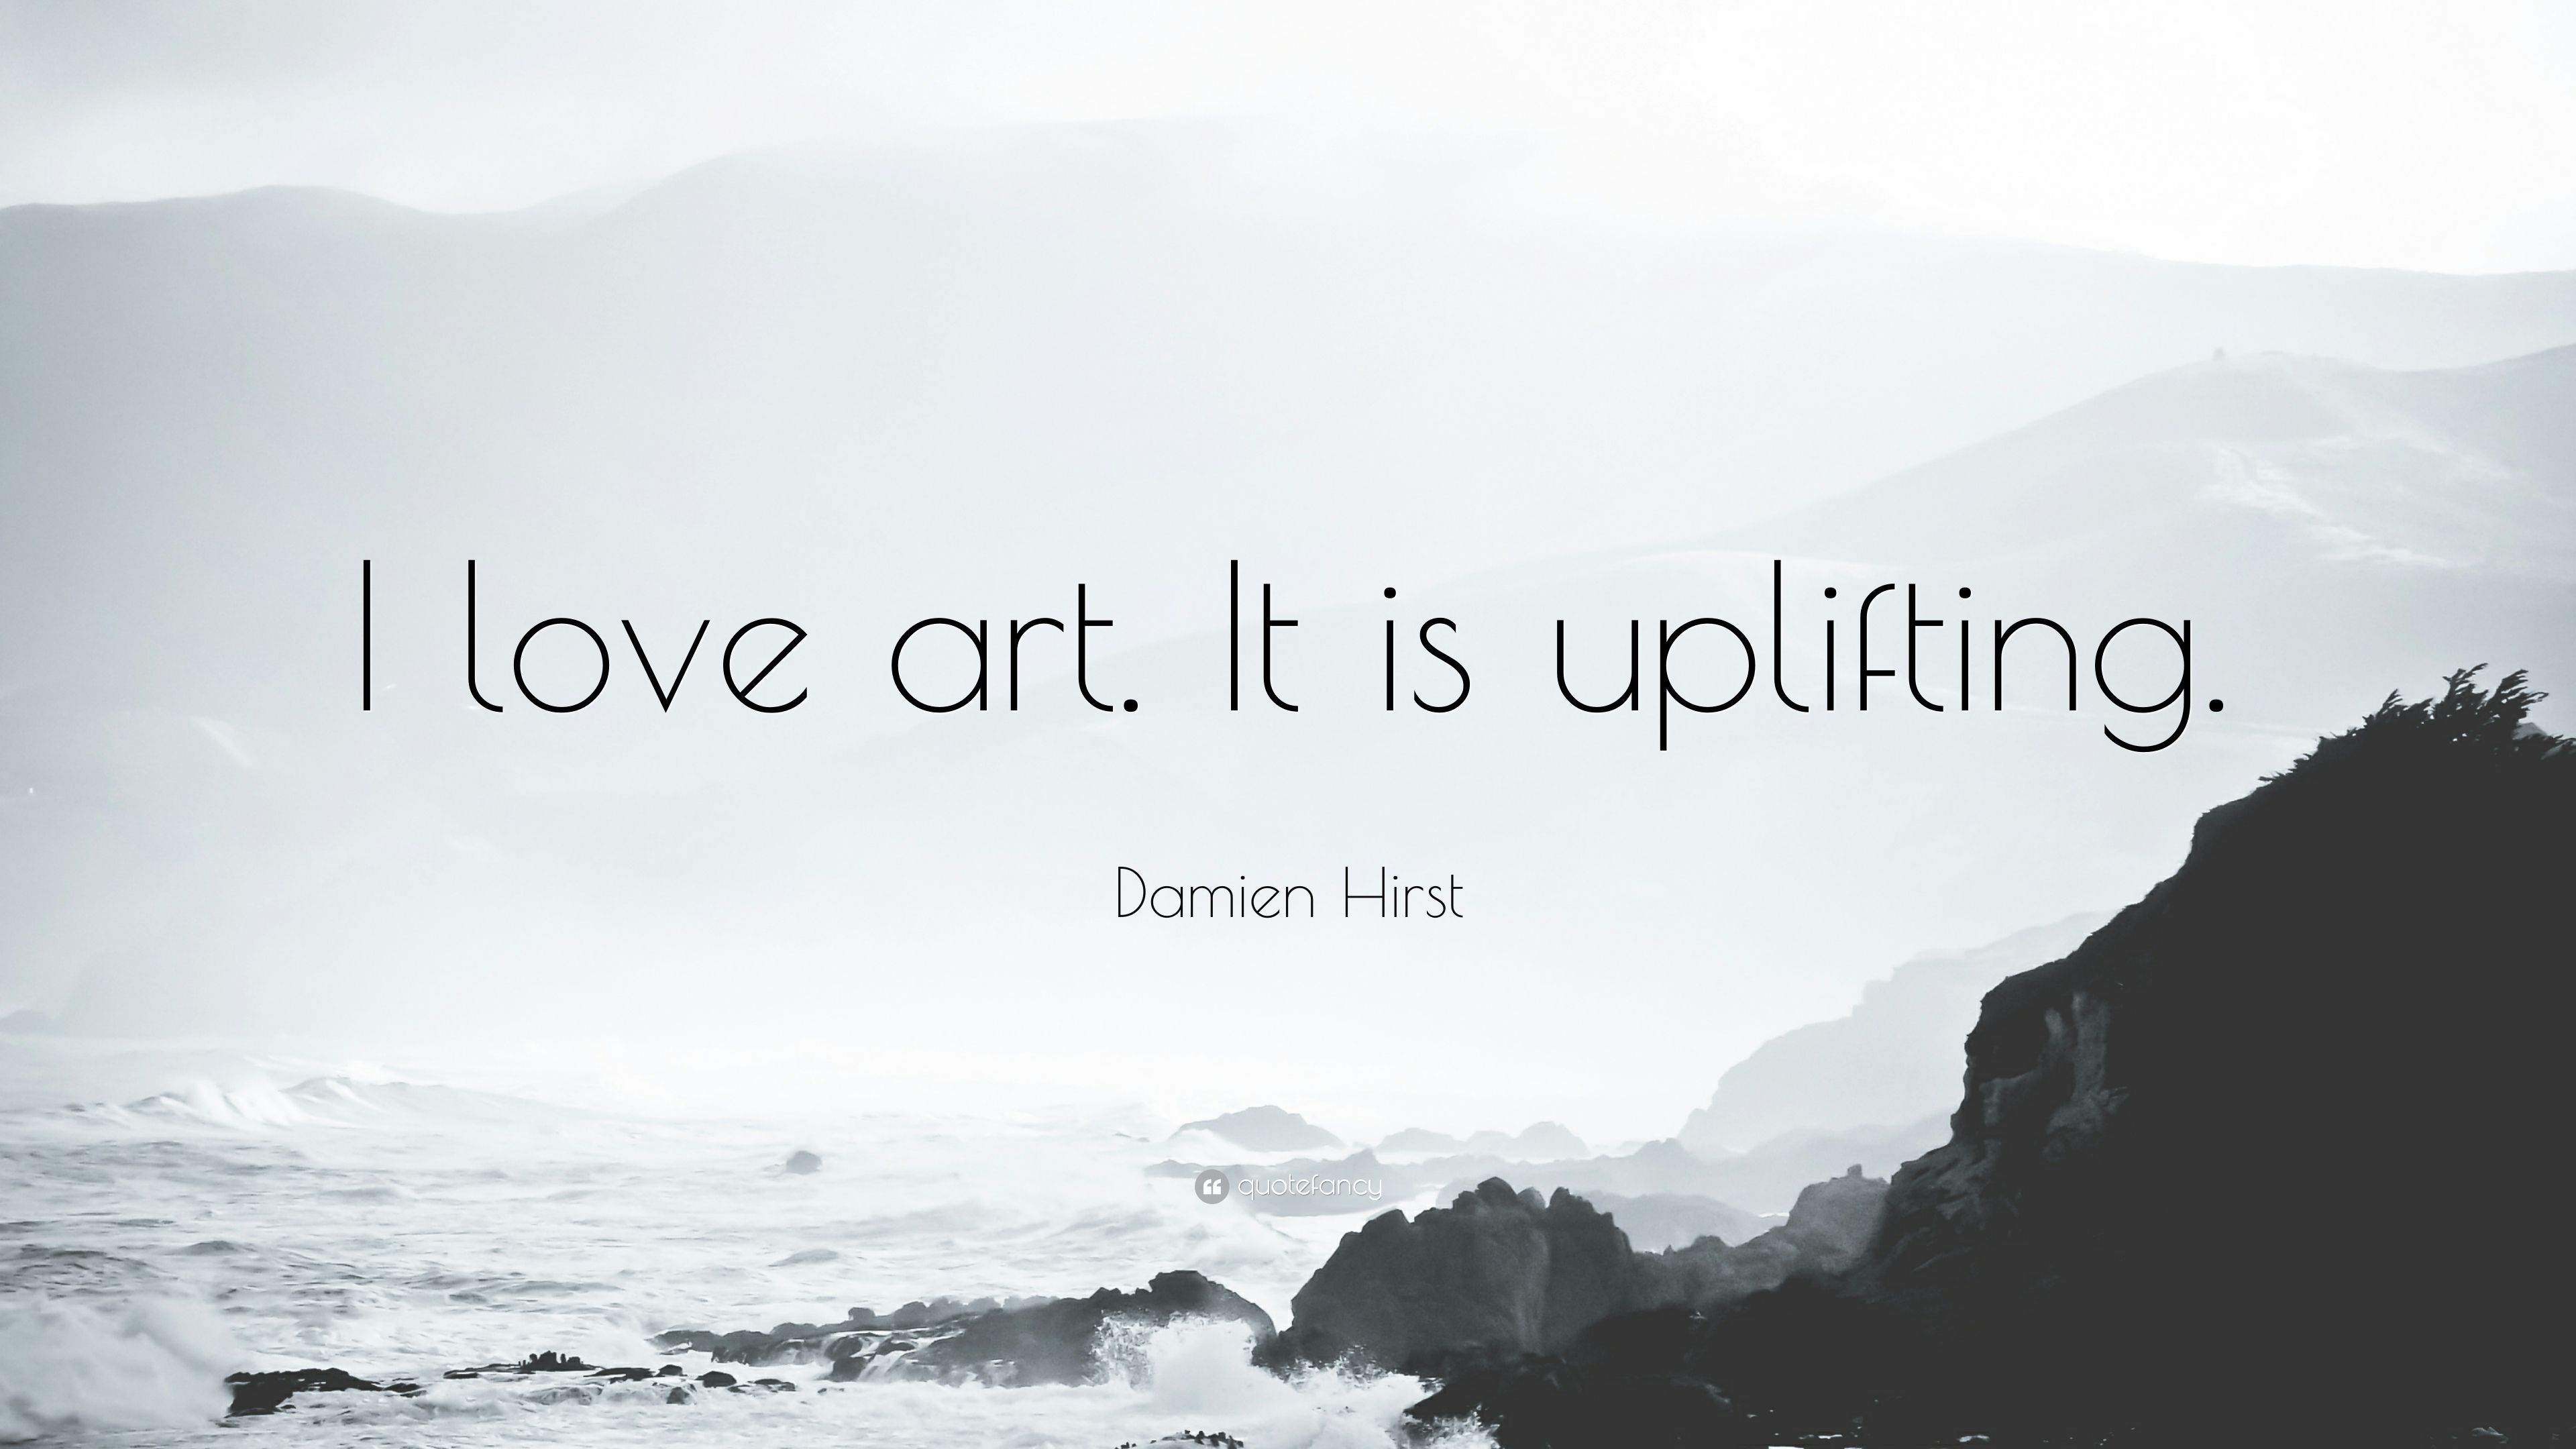 Damien Hirst Quote: “I love art. It is uplifting.” (7 wallpaper)